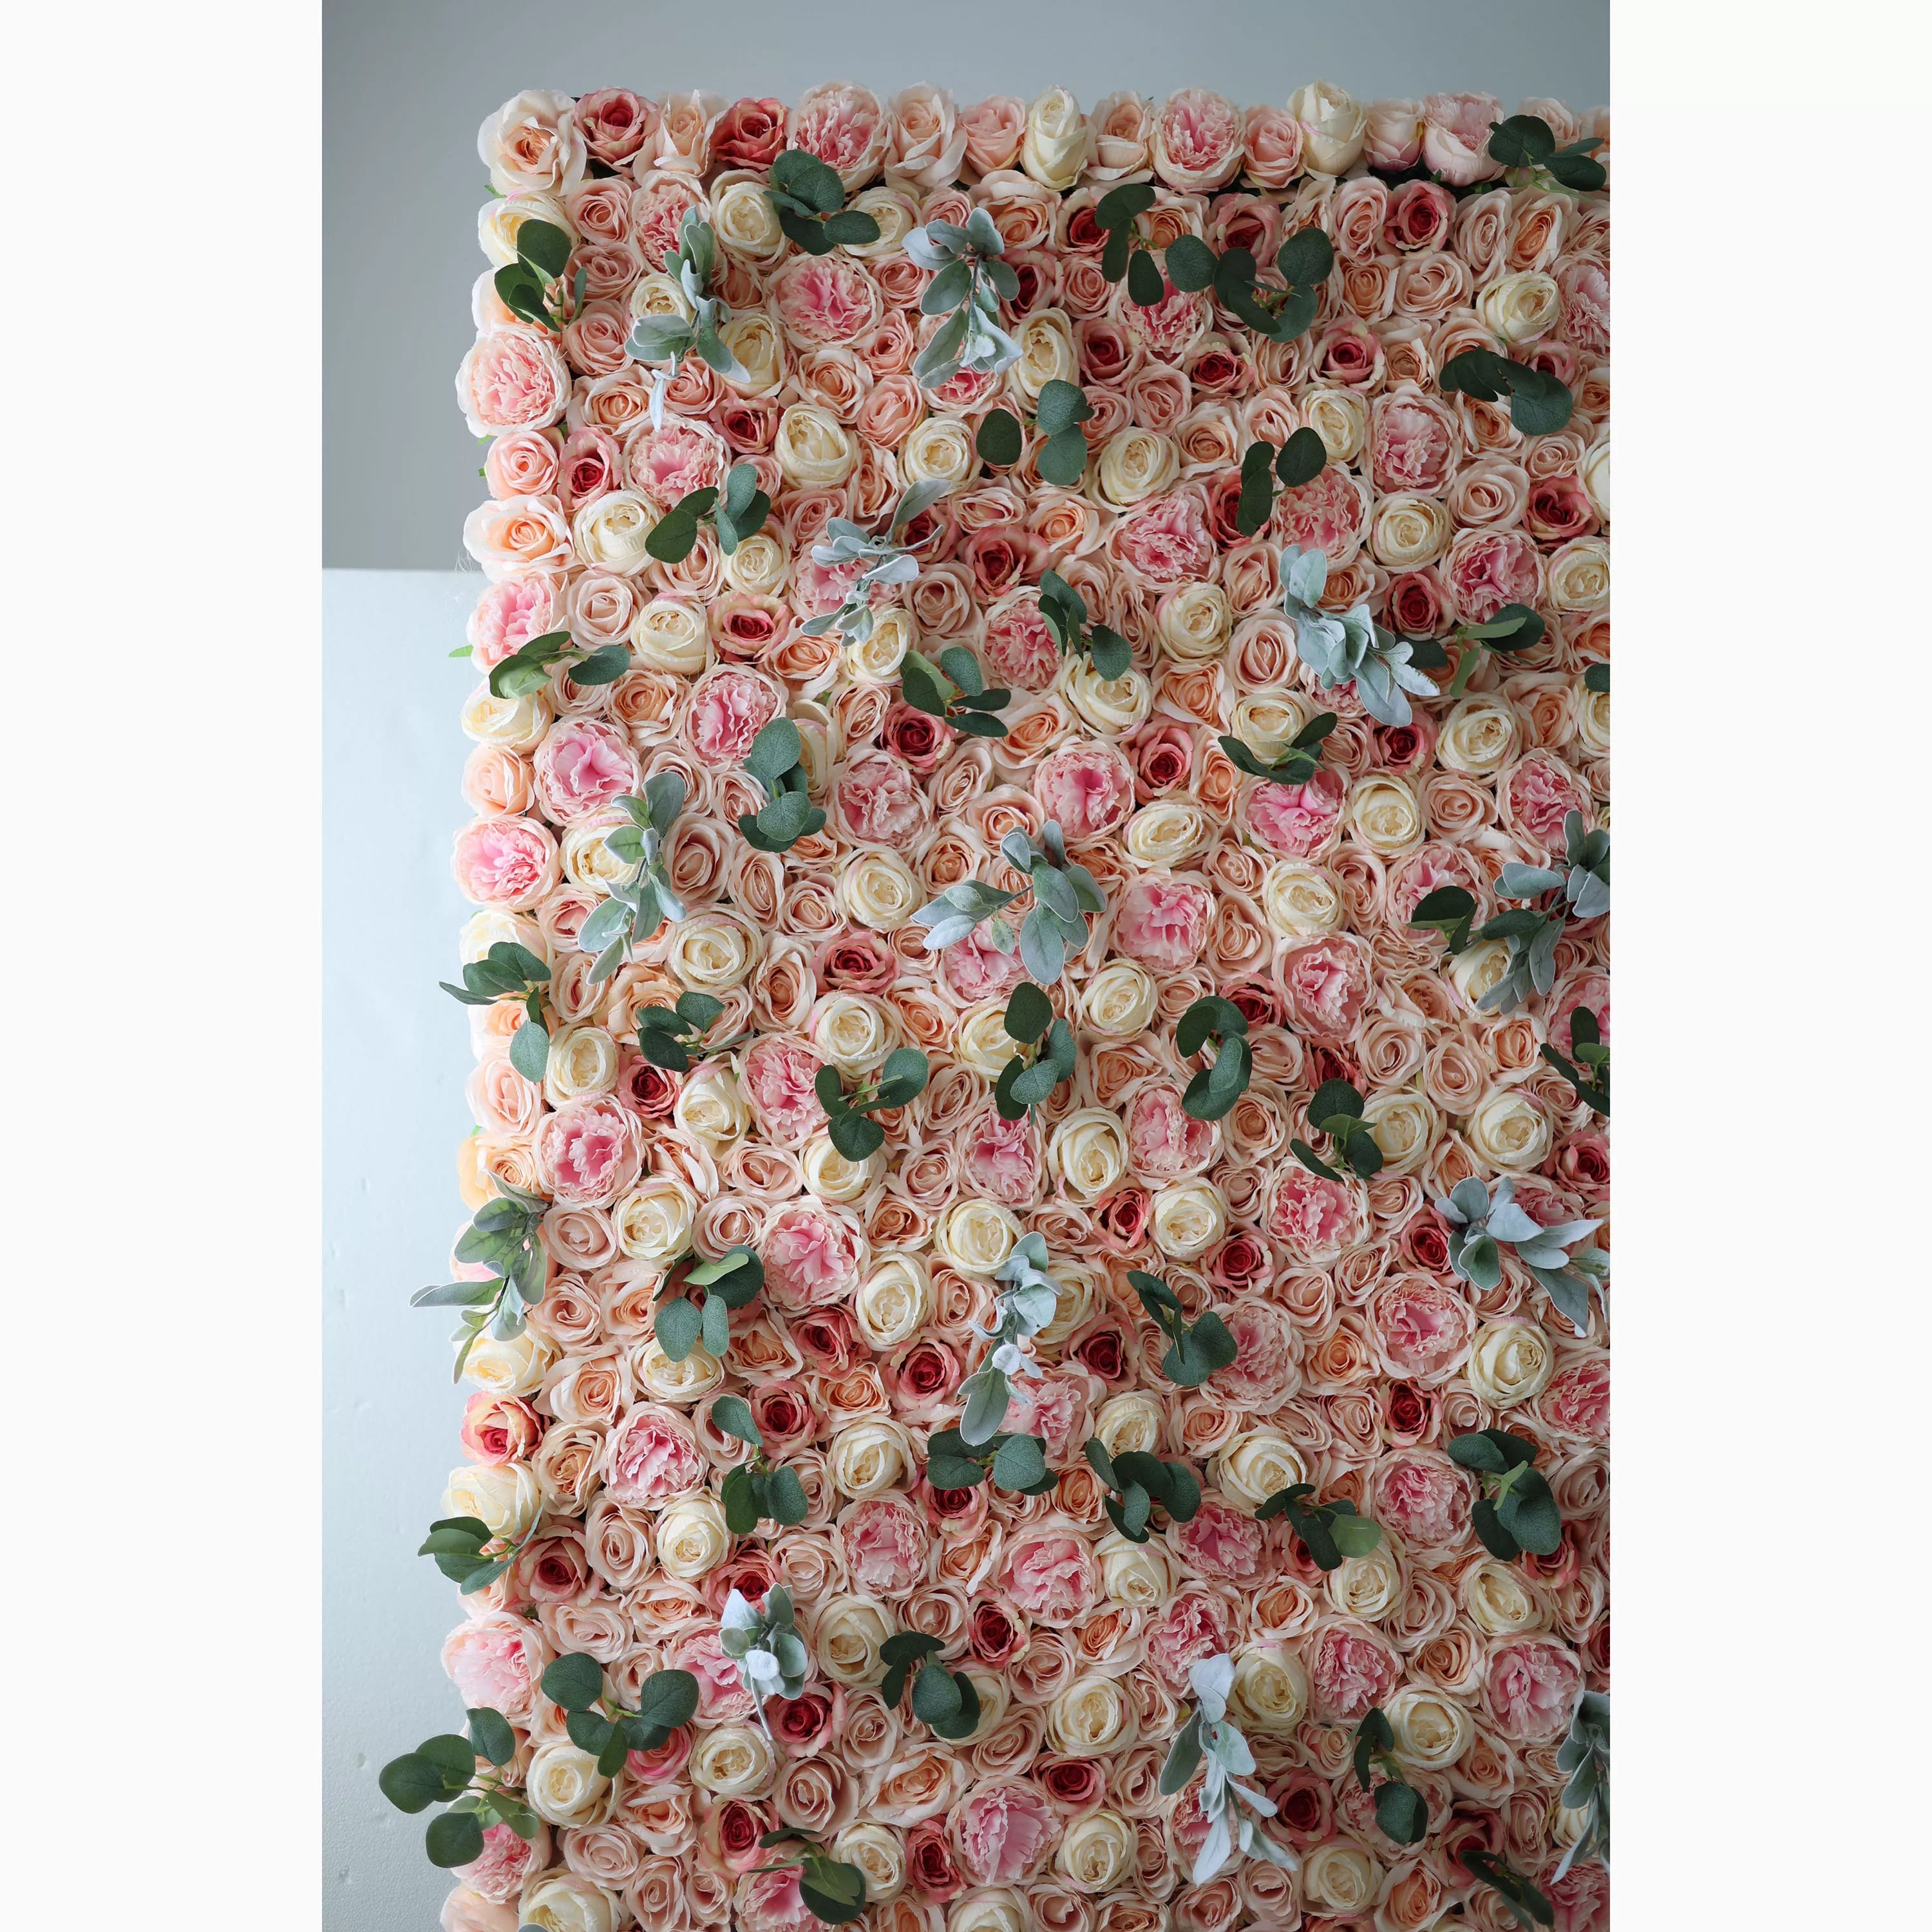 Valar Flowers Showcases: The Peach Blossom Euphoria - Artificial Fabric Flower Wall Featuring Rosy Blush and Creamy Peach Florals – An Enchanting Backdrop for Celebrations & Cozy Home Interiors-VF-215